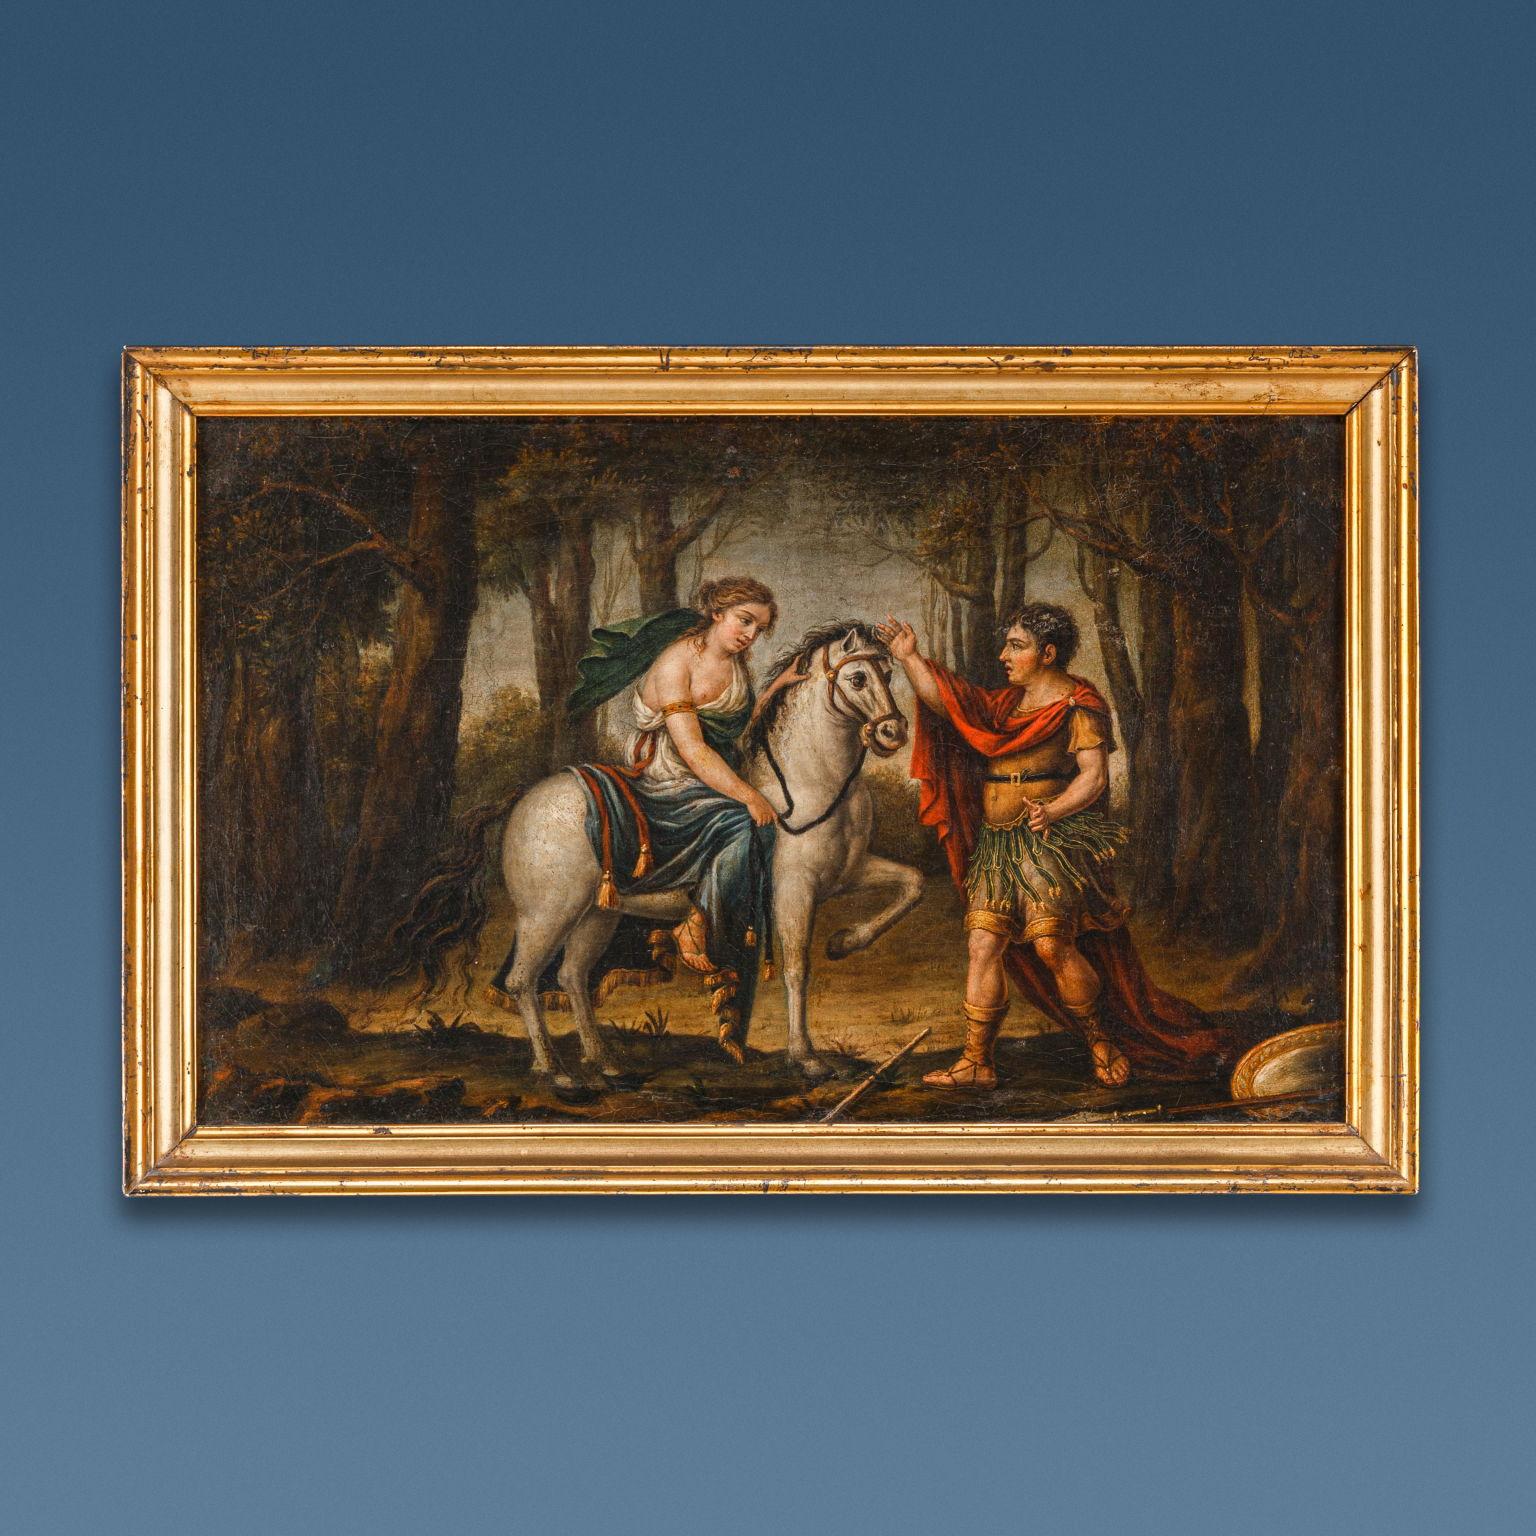 Oil painting on canvas. Lombard area of the late 18th century. The four canvases show scenes from Orlando Furioso, the famous epic poem written by Ludovico Ariosto and published for the first time in 1516. On the frame, on the back, there are